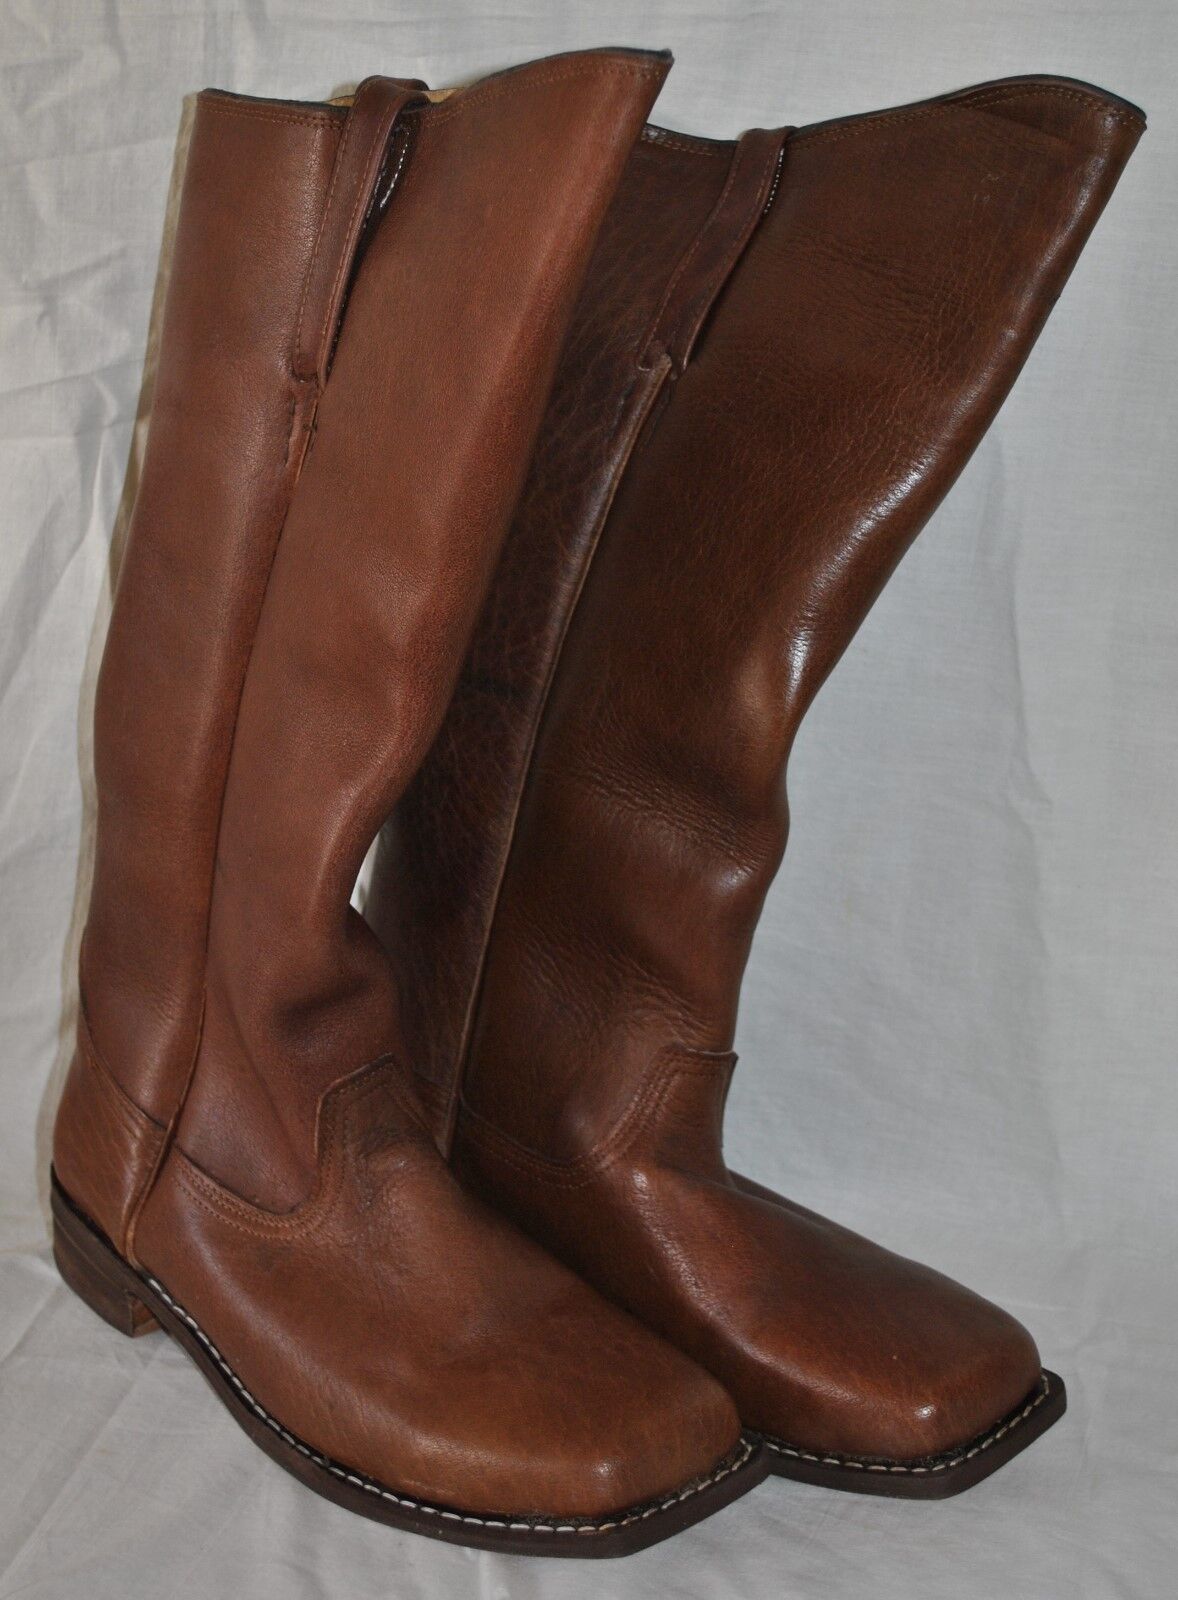 Cavalry Boots - Sizes 8-13 - Brown Leather - Special Order - 6-8 Week Delivery